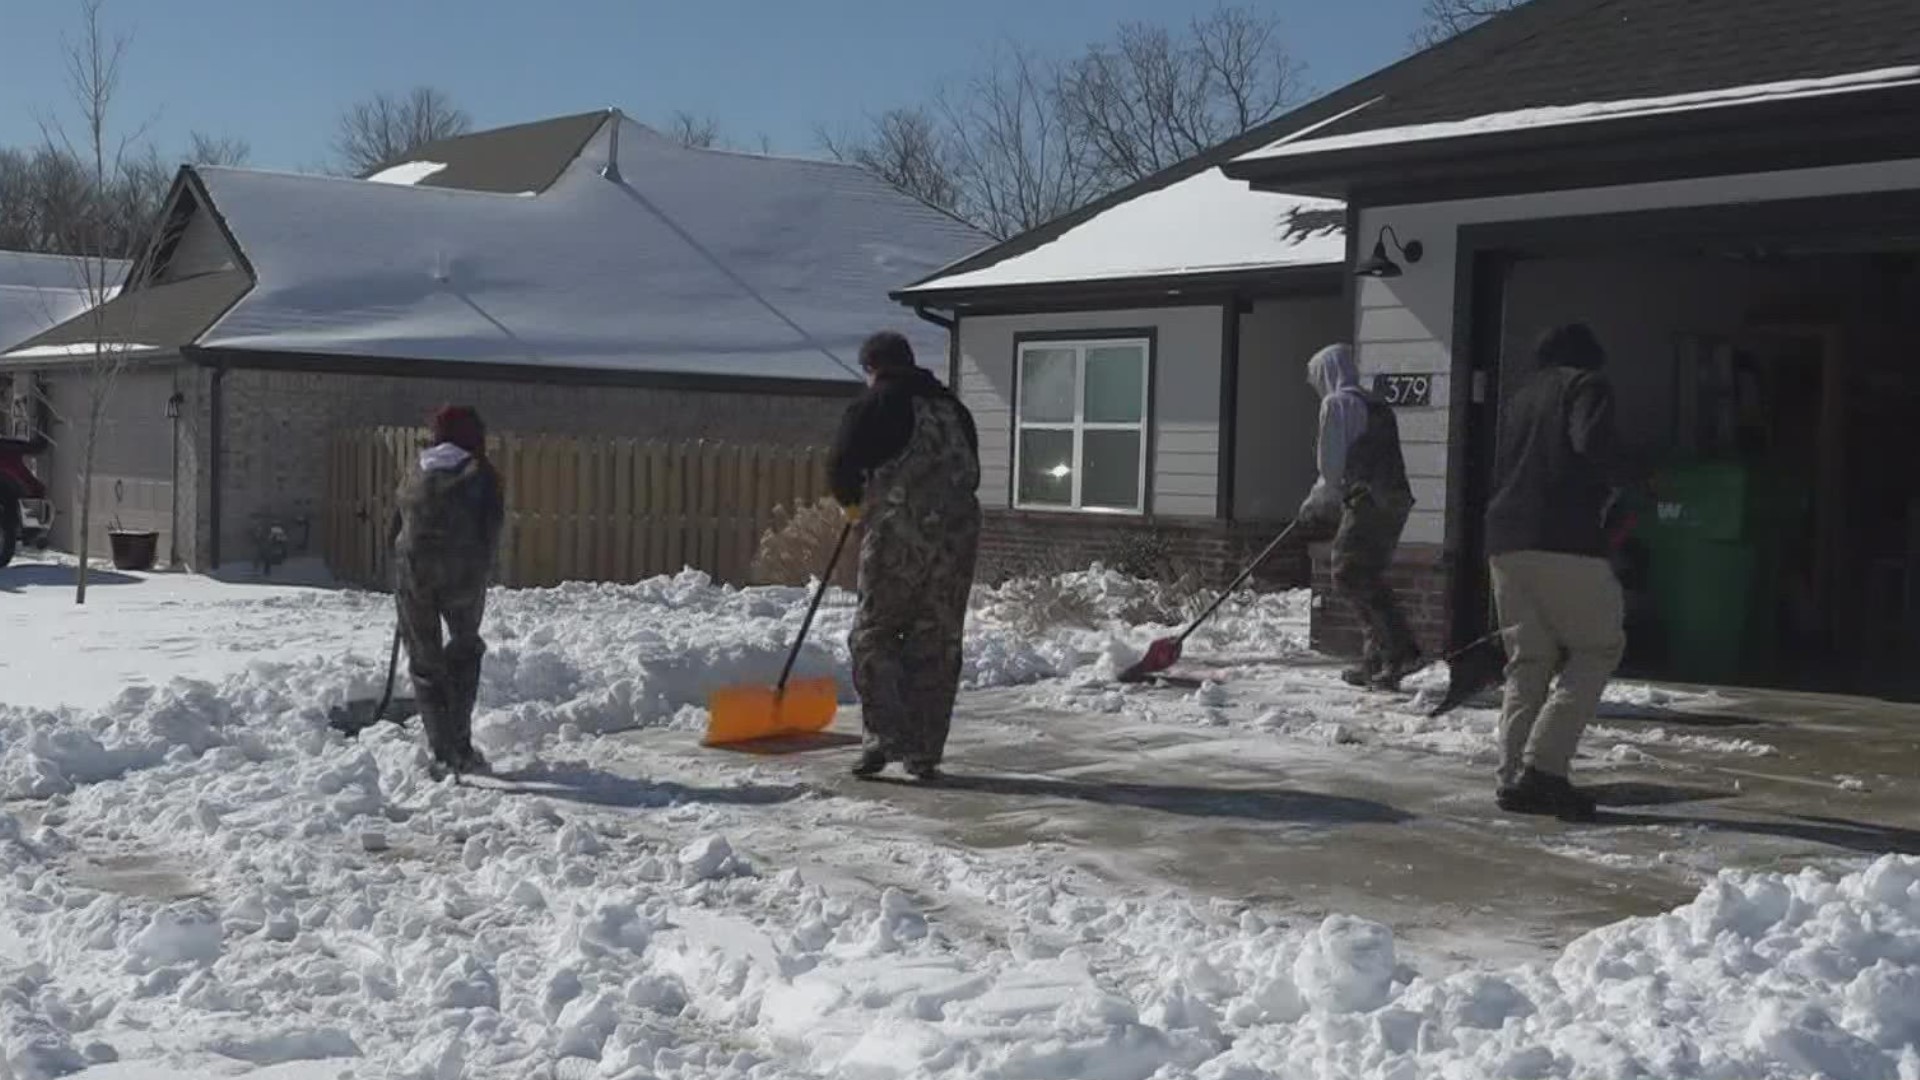 A group of teens in Farmington spent their snow day working in the snow shoveling people’s driveways.